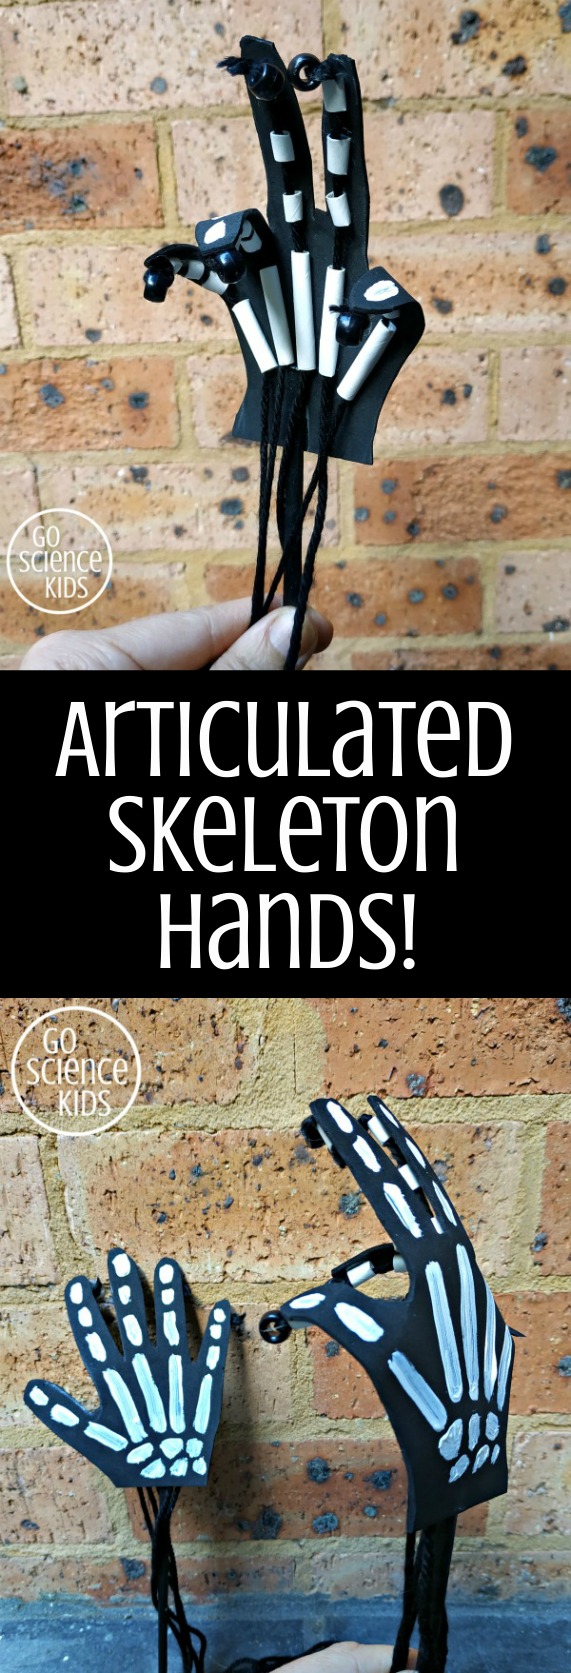 Articulated skeleton hands - fun science craft for kids to make